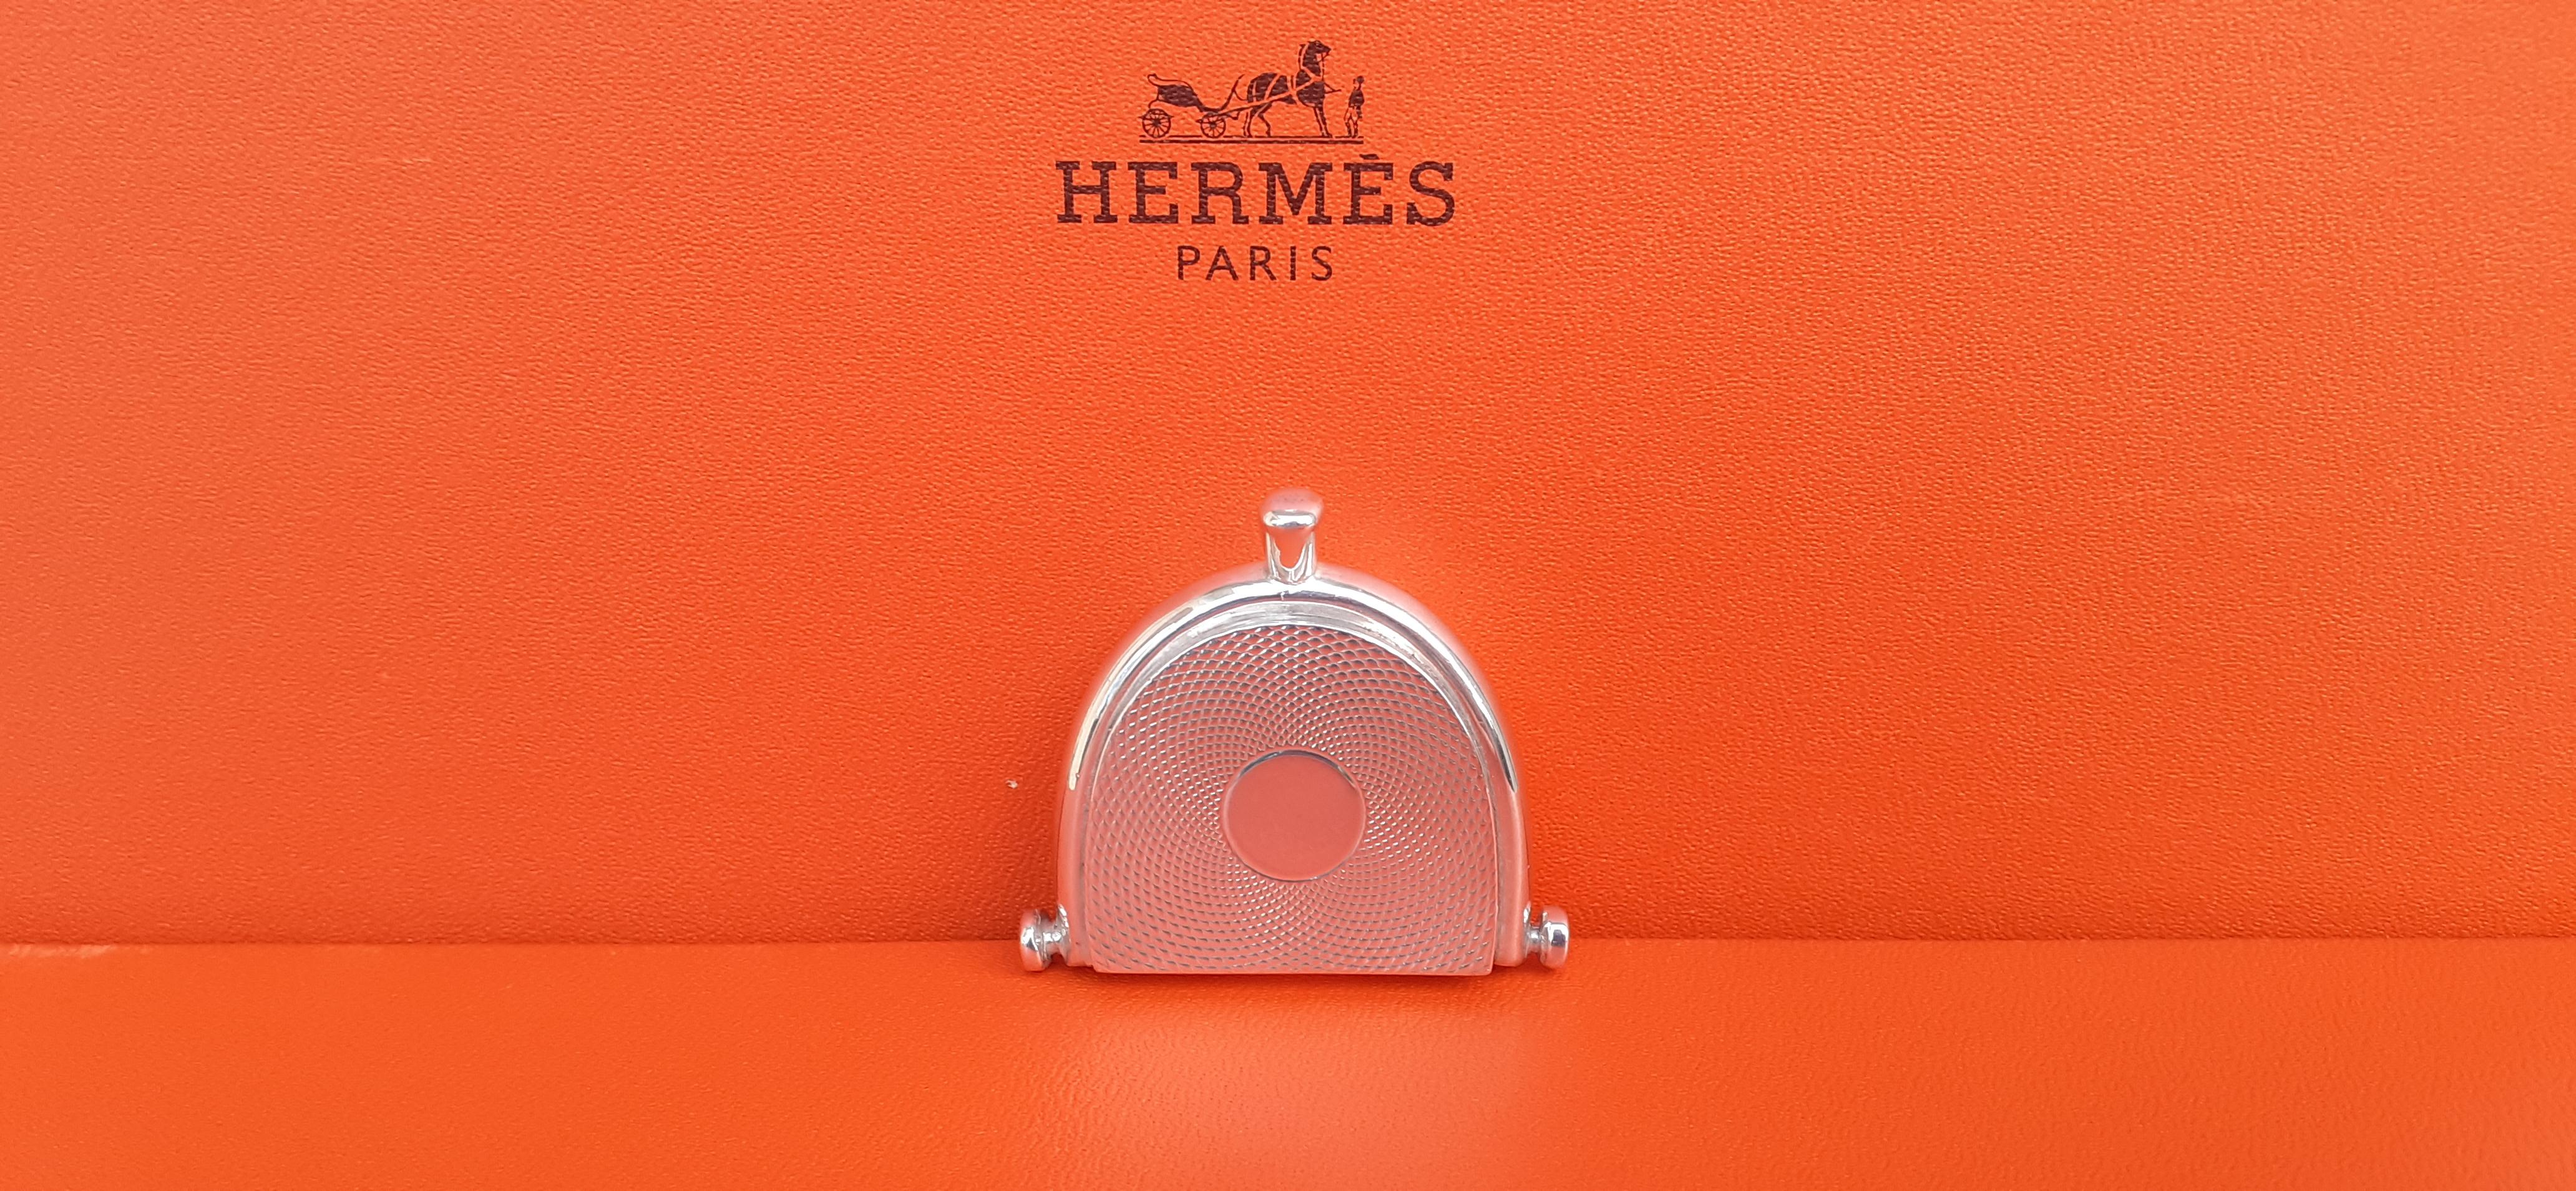 Exceptional Hermès Guilloche Spur Shaped Pill Box By Ravinet d'Enfert For Sale 7